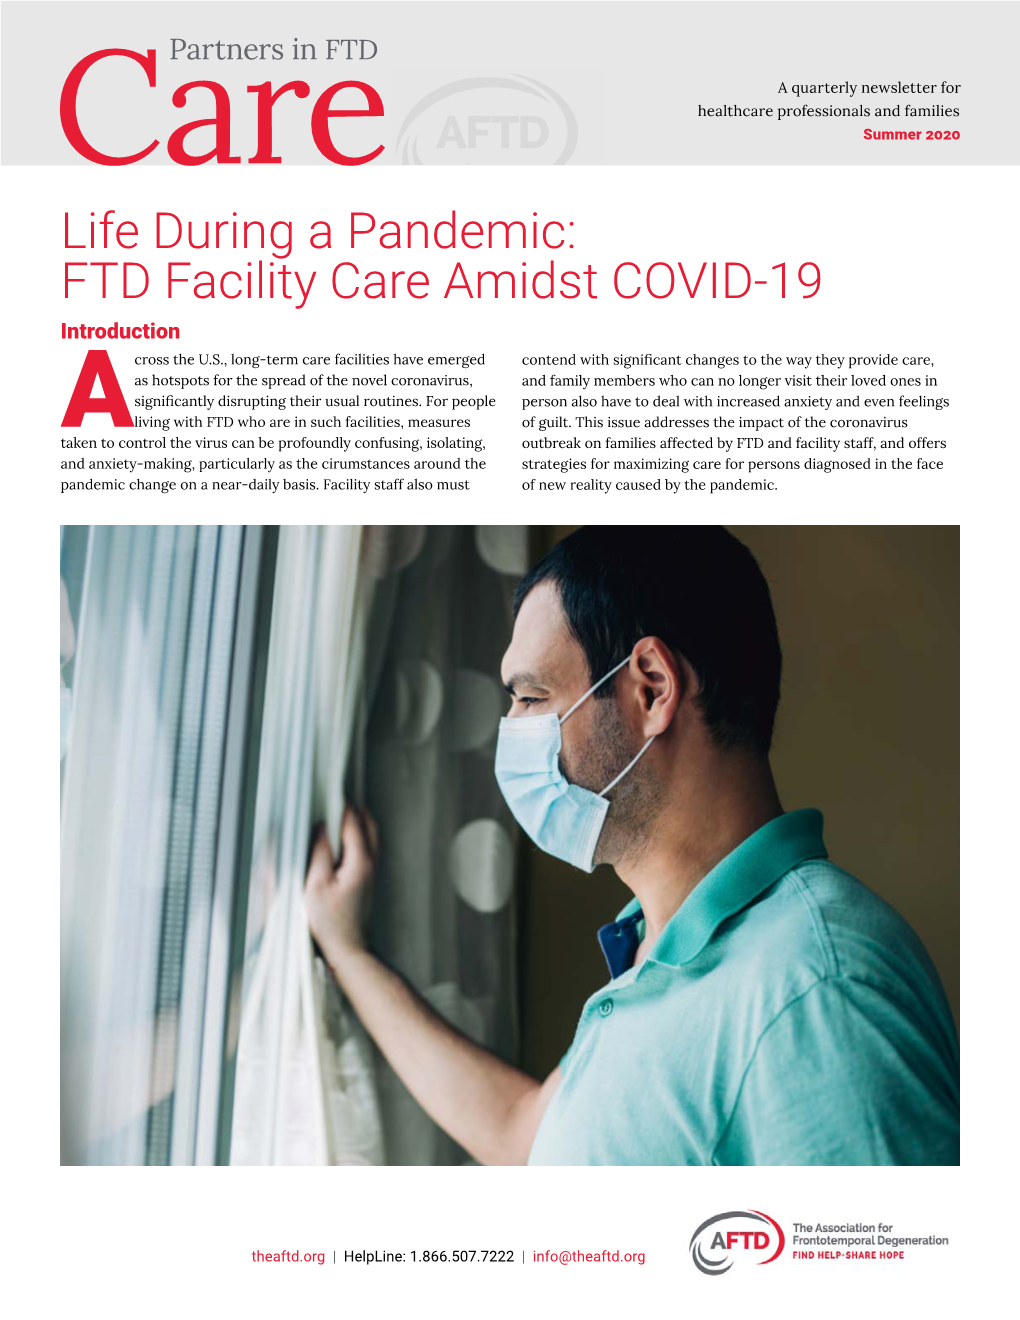 Summer 2020 Issue of AFTD's Partners in FTD Care Newsletter